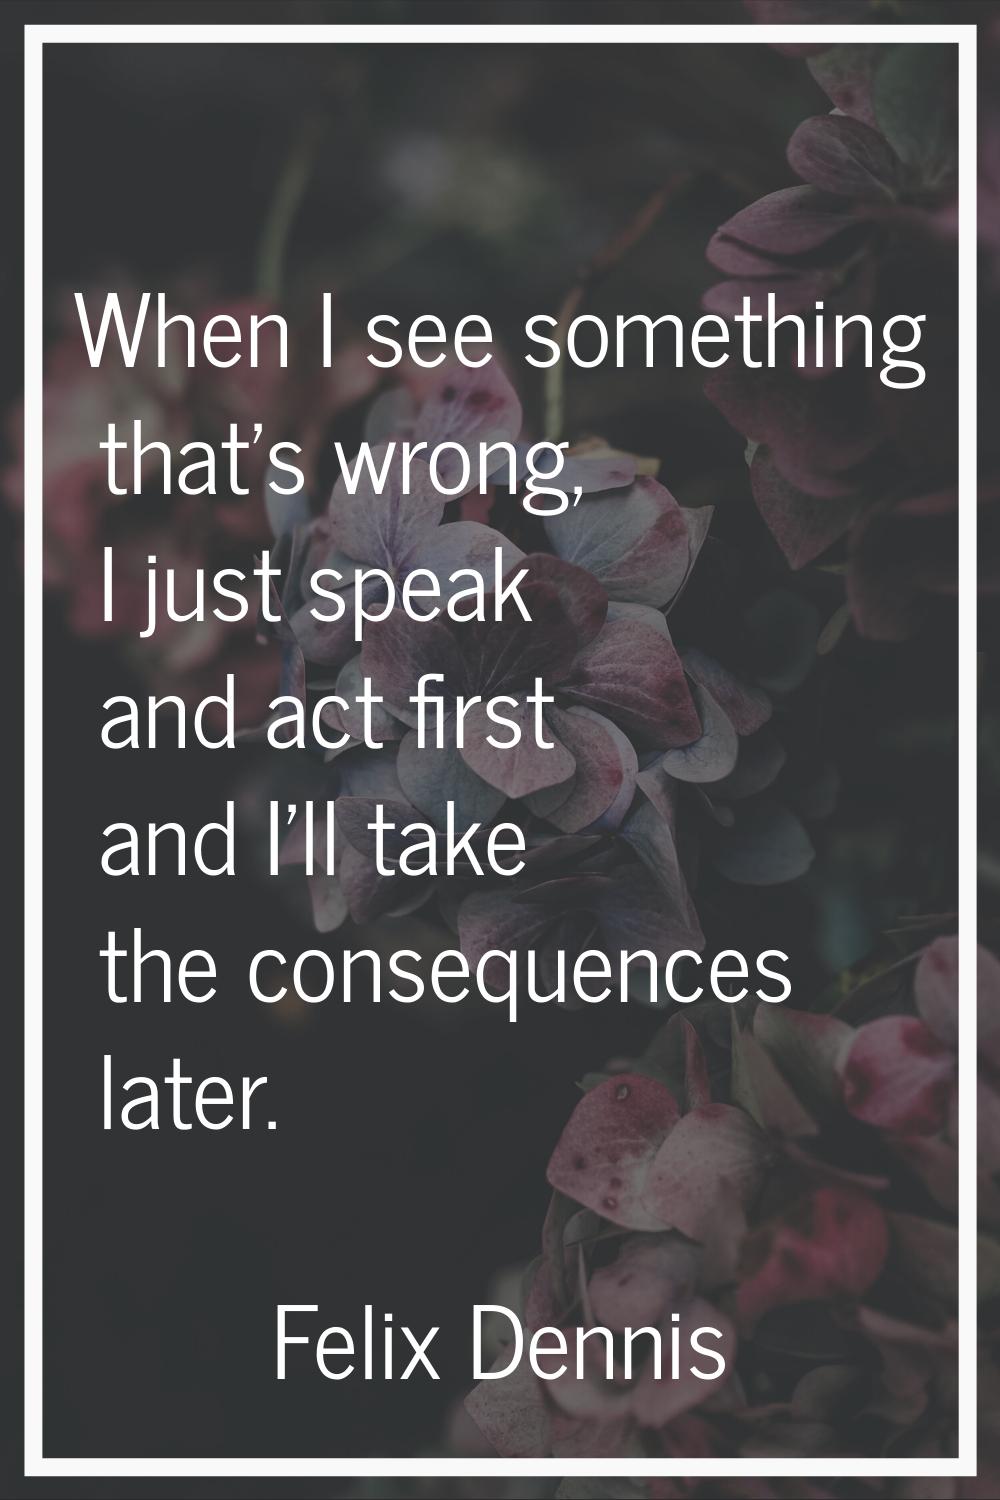 When I see something that's wrong, I just speak and act first and I'll take the consequences later.